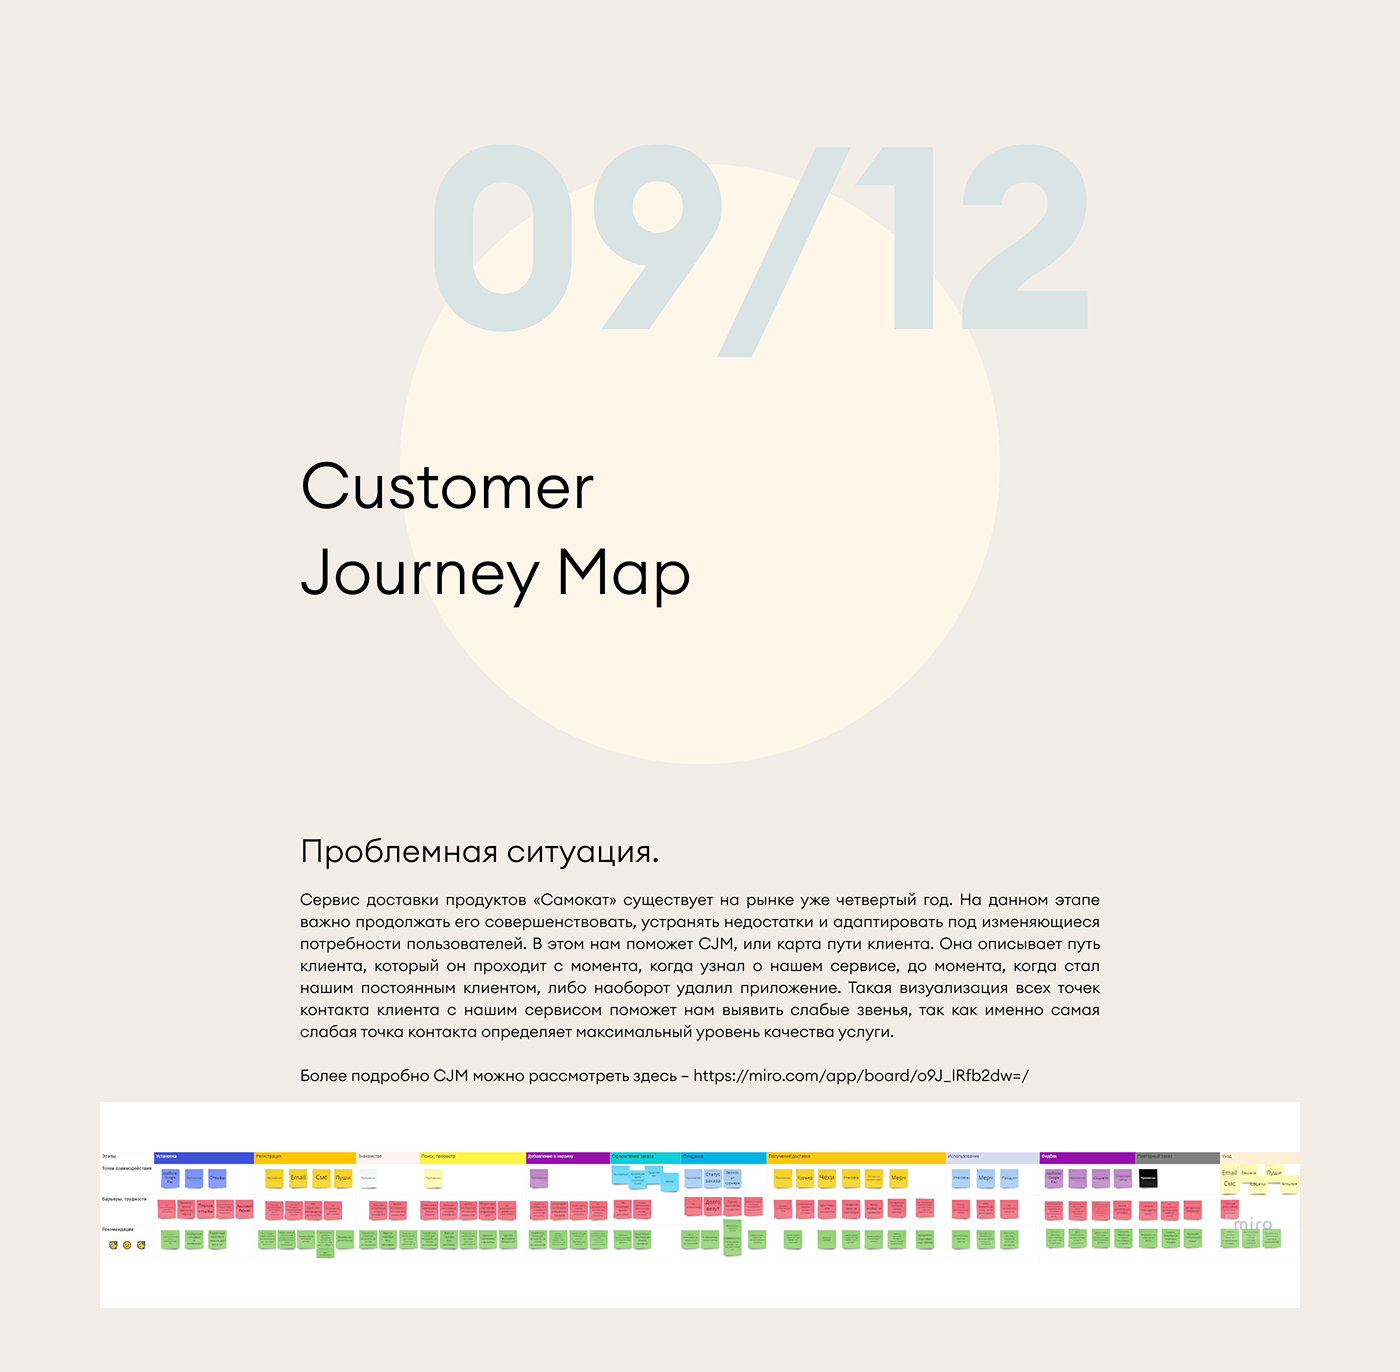 analitics Customer Journey Map information architecture  job stories personas User Experience Research user flow User stories UX design wireframe